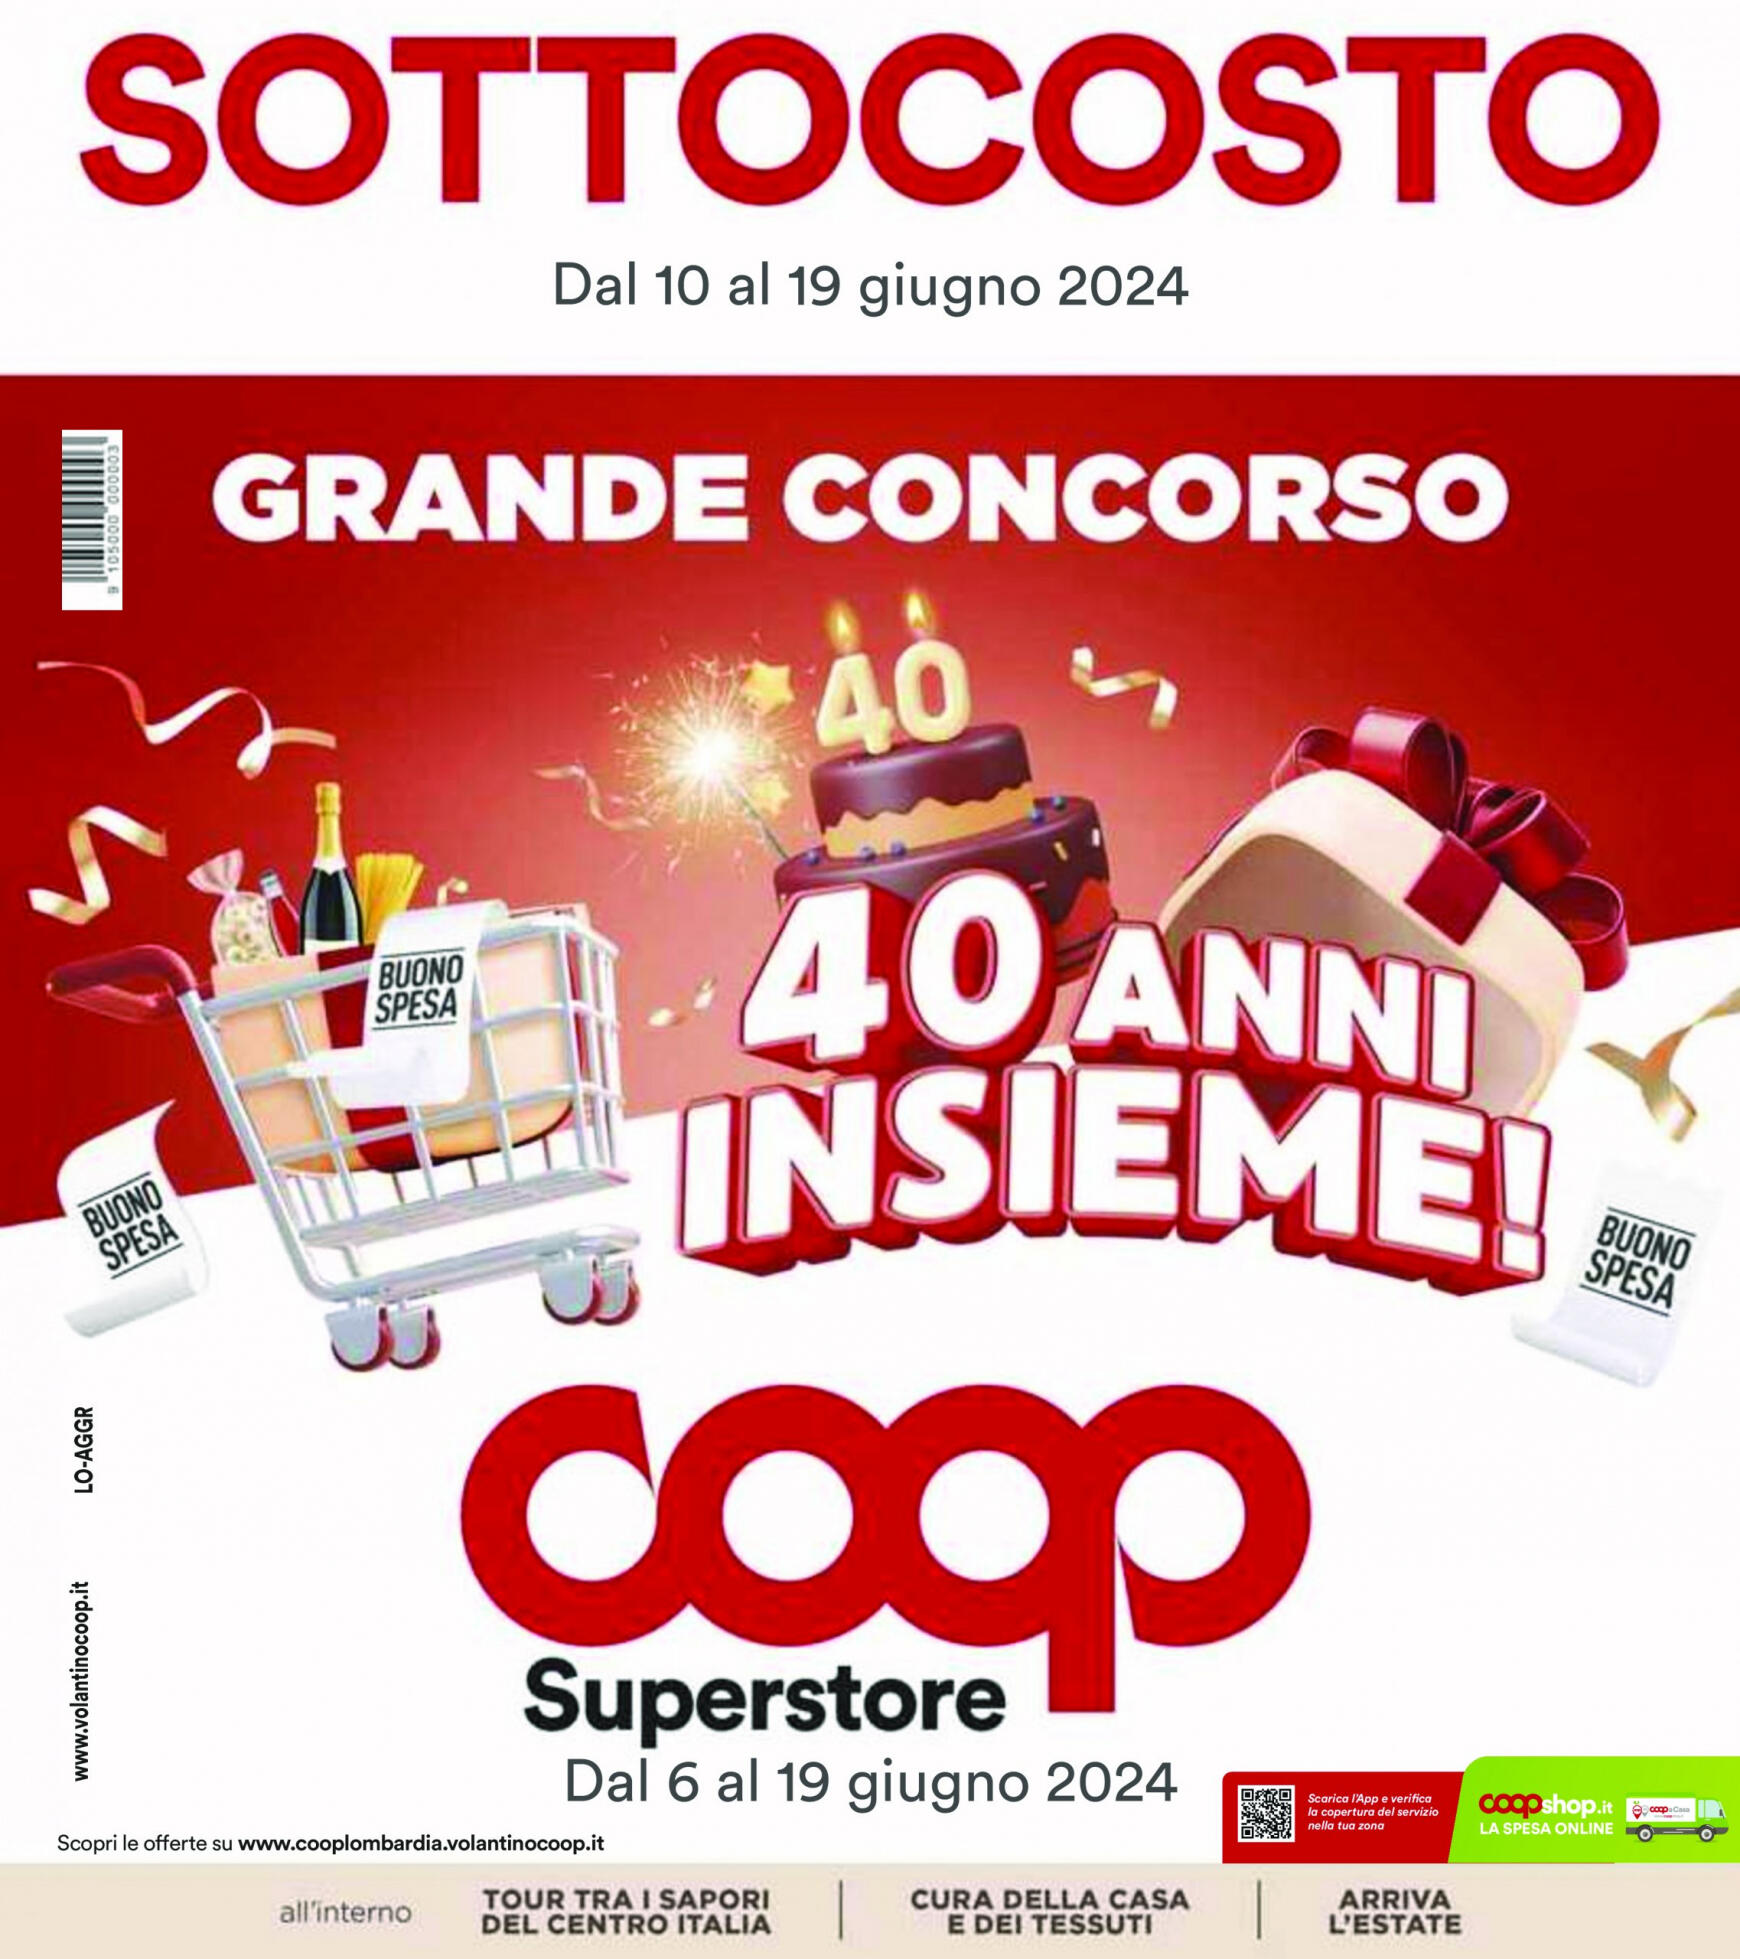 coop - Nuovo volantino Coop 10.06. - 19.06. - page: 1